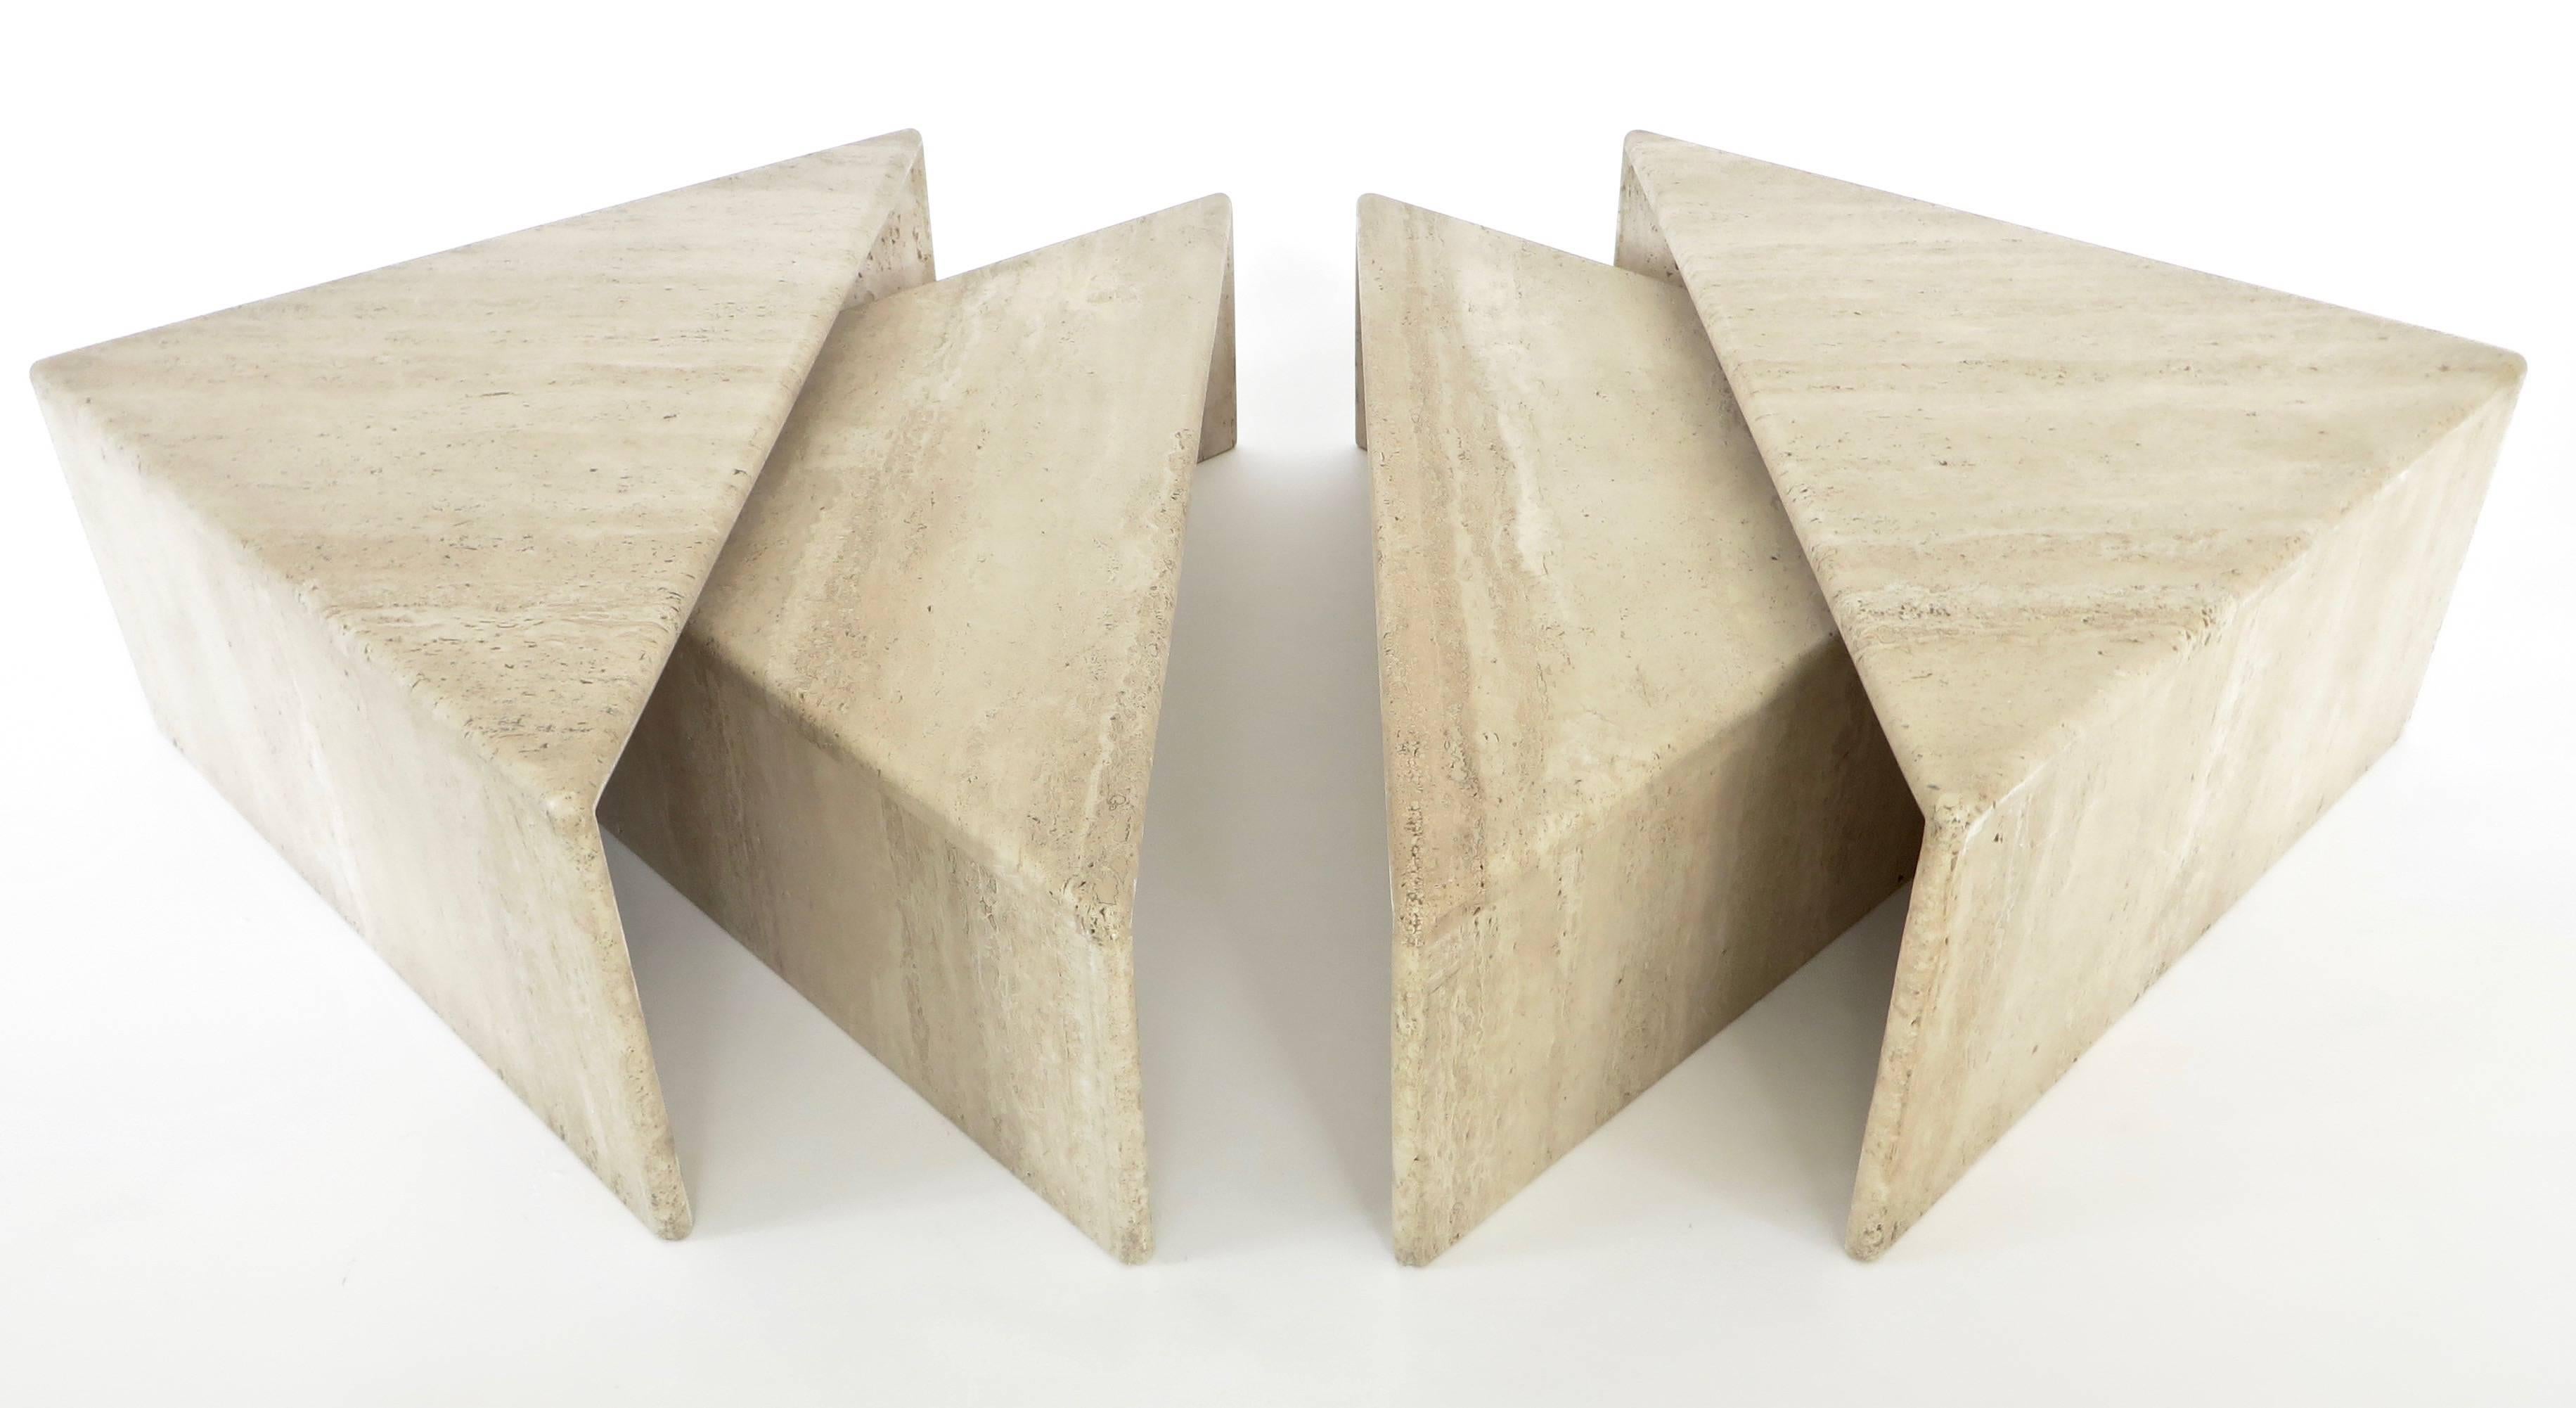 An Italian four-part modular multi level travertine coffee table, circa 1970.
Each part can be arranged in any formation as sculptural as one wishes or used as a coffee table and side tables.
Beautiful honed travertine with various tones of